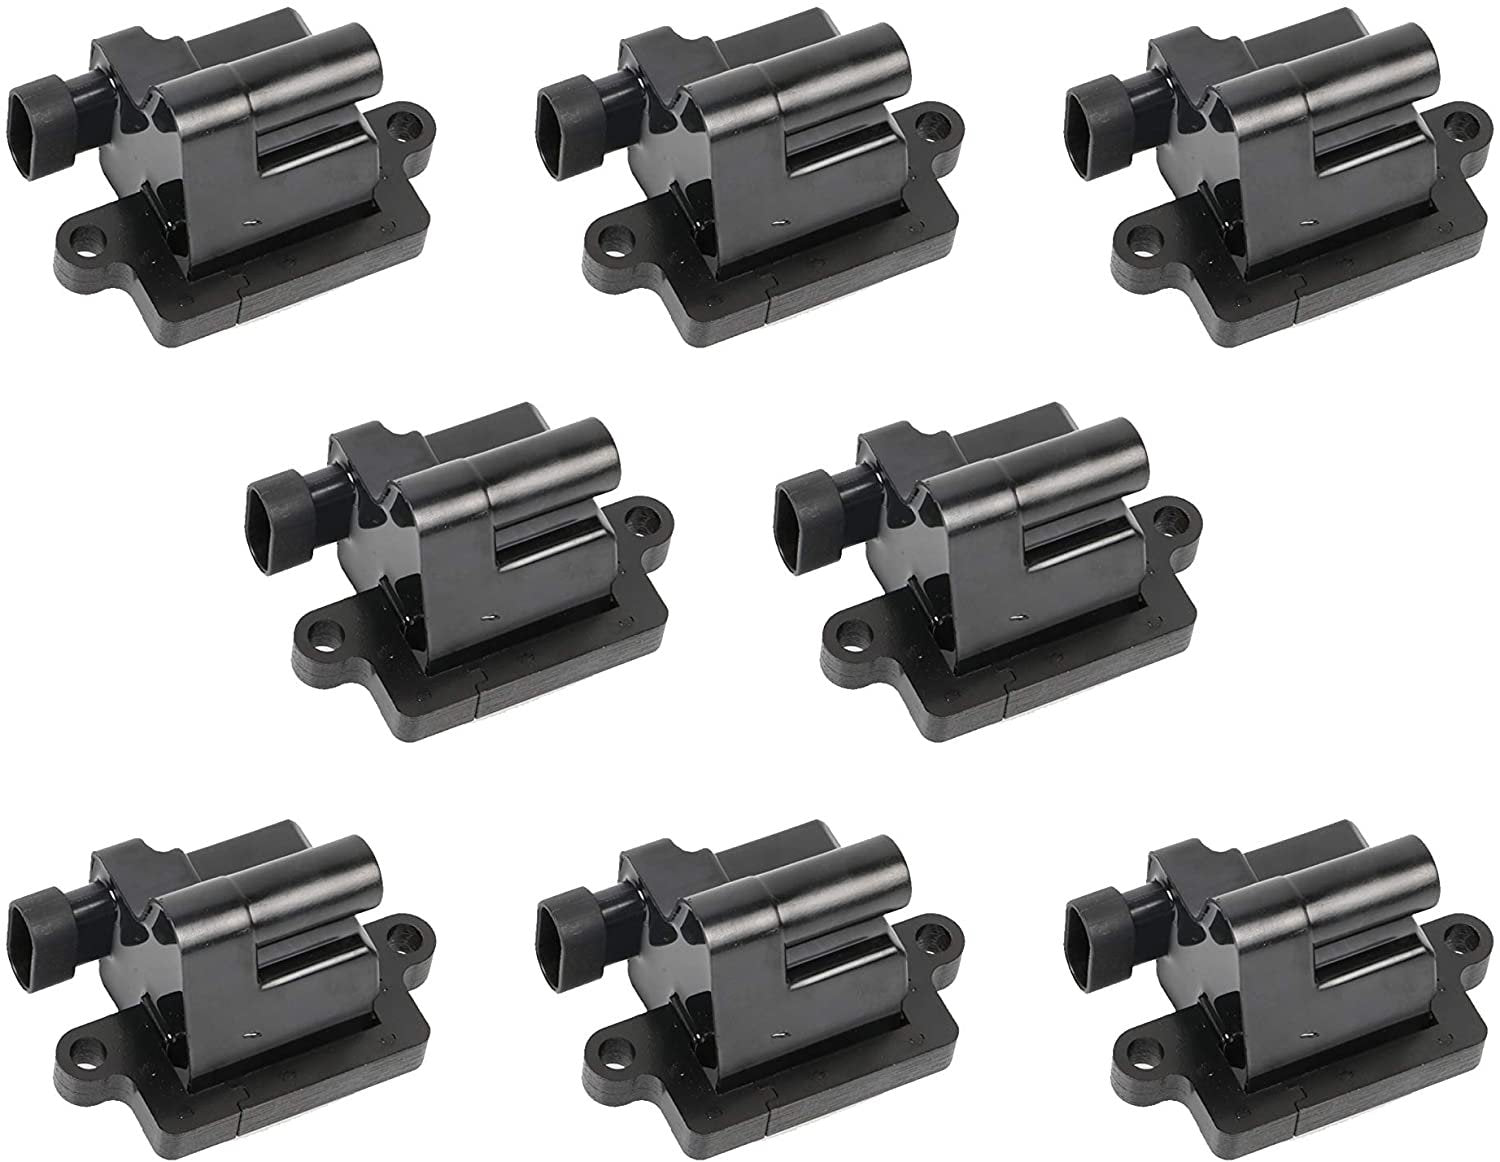 Set of 8 Ignition Coils for Cadillac/Chevy/GMC - Replace OE #12558693 - Compatible with Escalade, Silverado, Tahoe, Yukon - Free Shipping